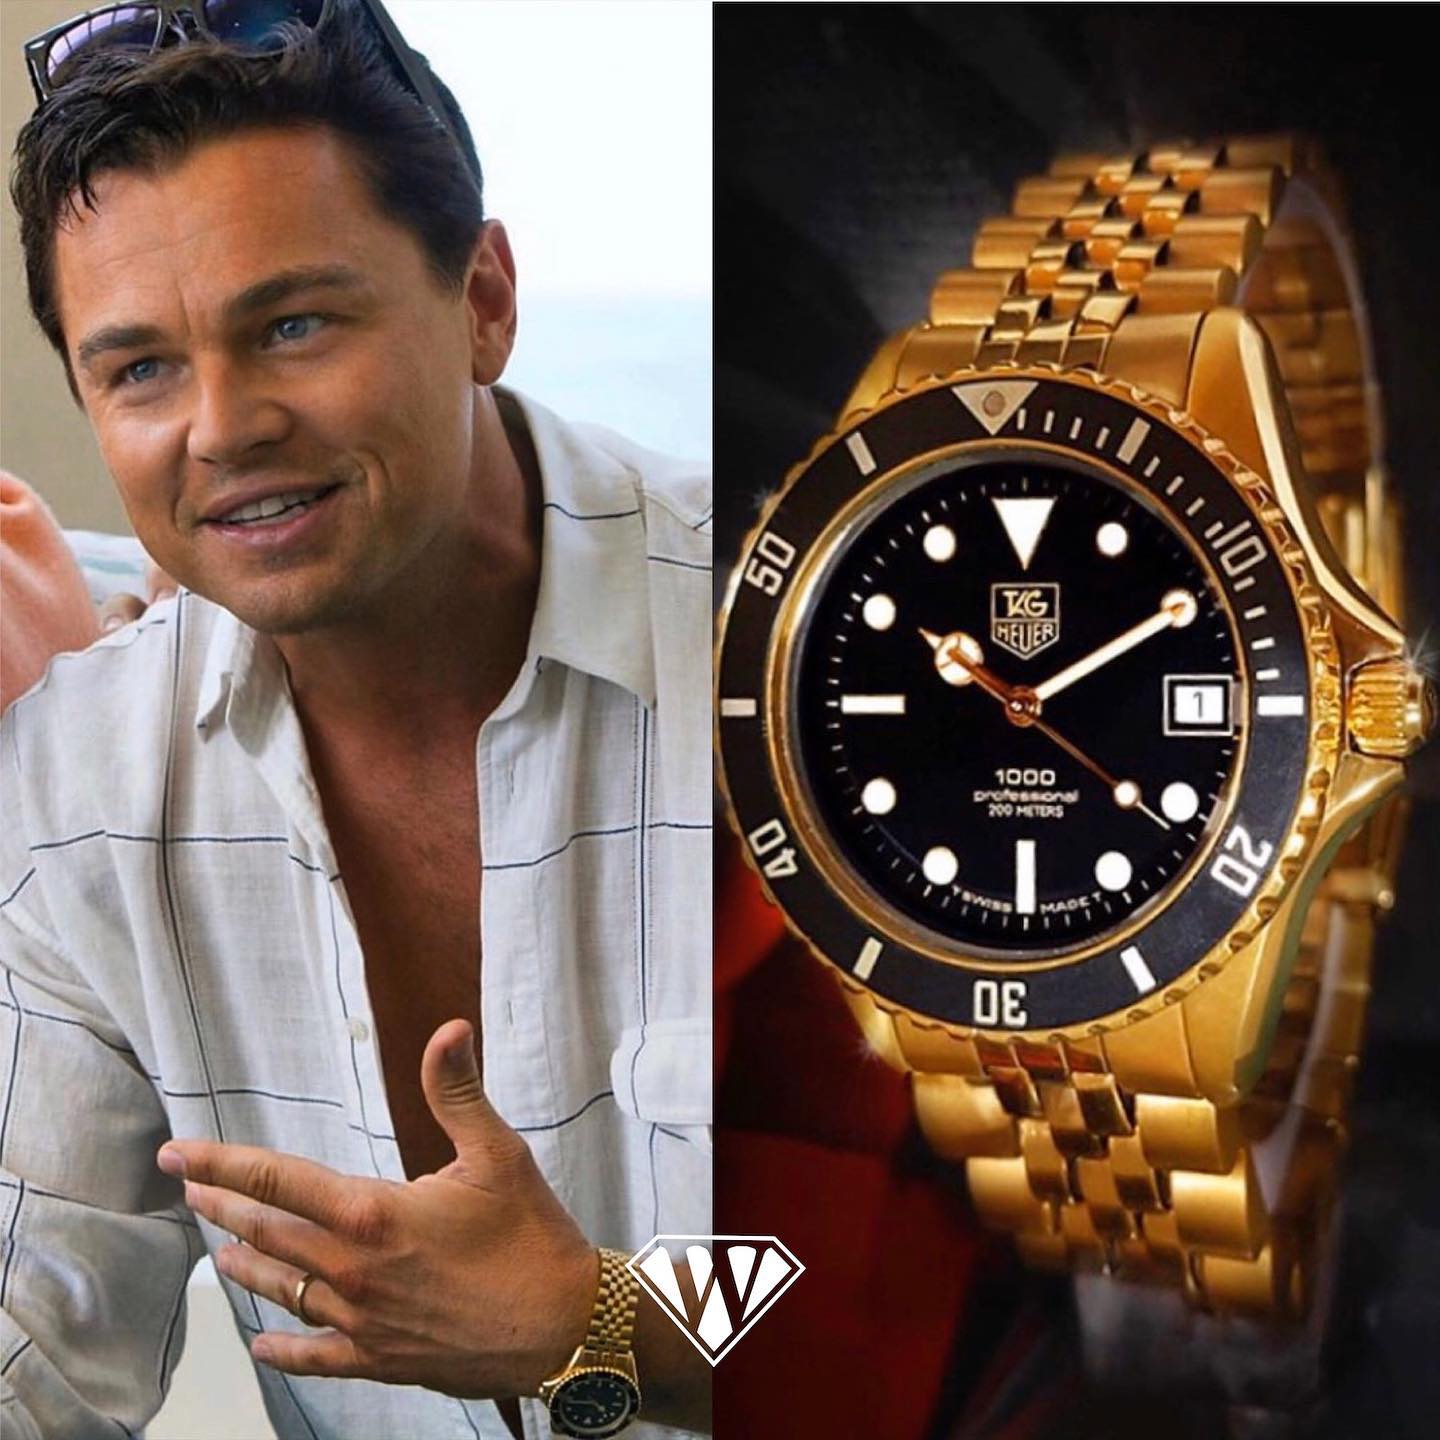 Wolf of wall street 58 minutes 26 seconds